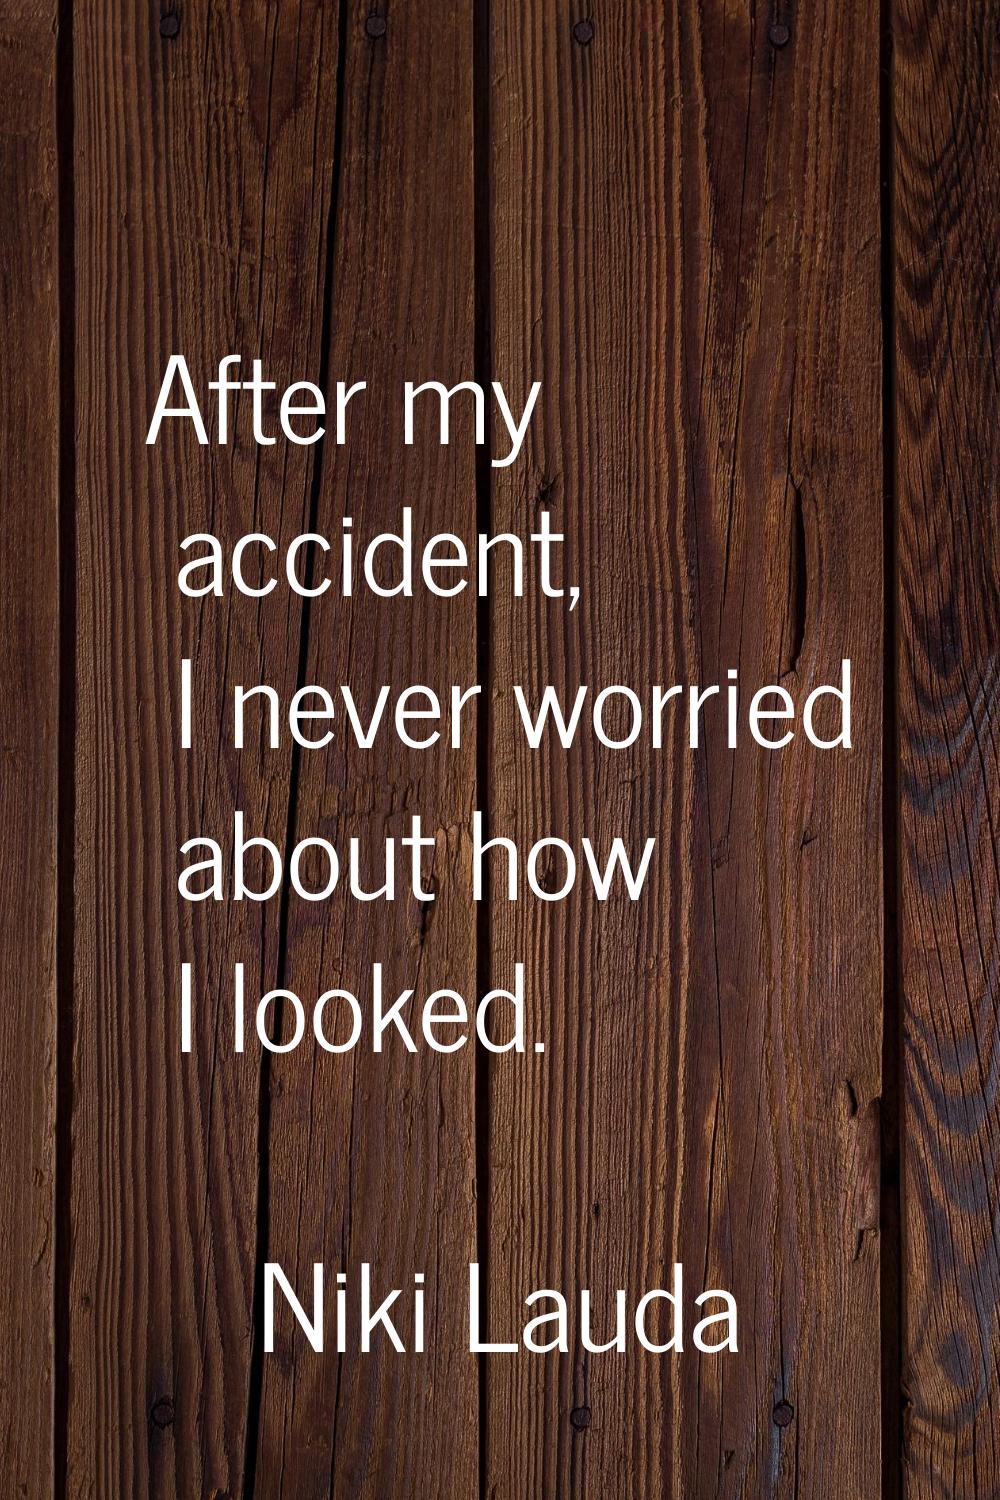 After my accident, I never worried about how I looked.